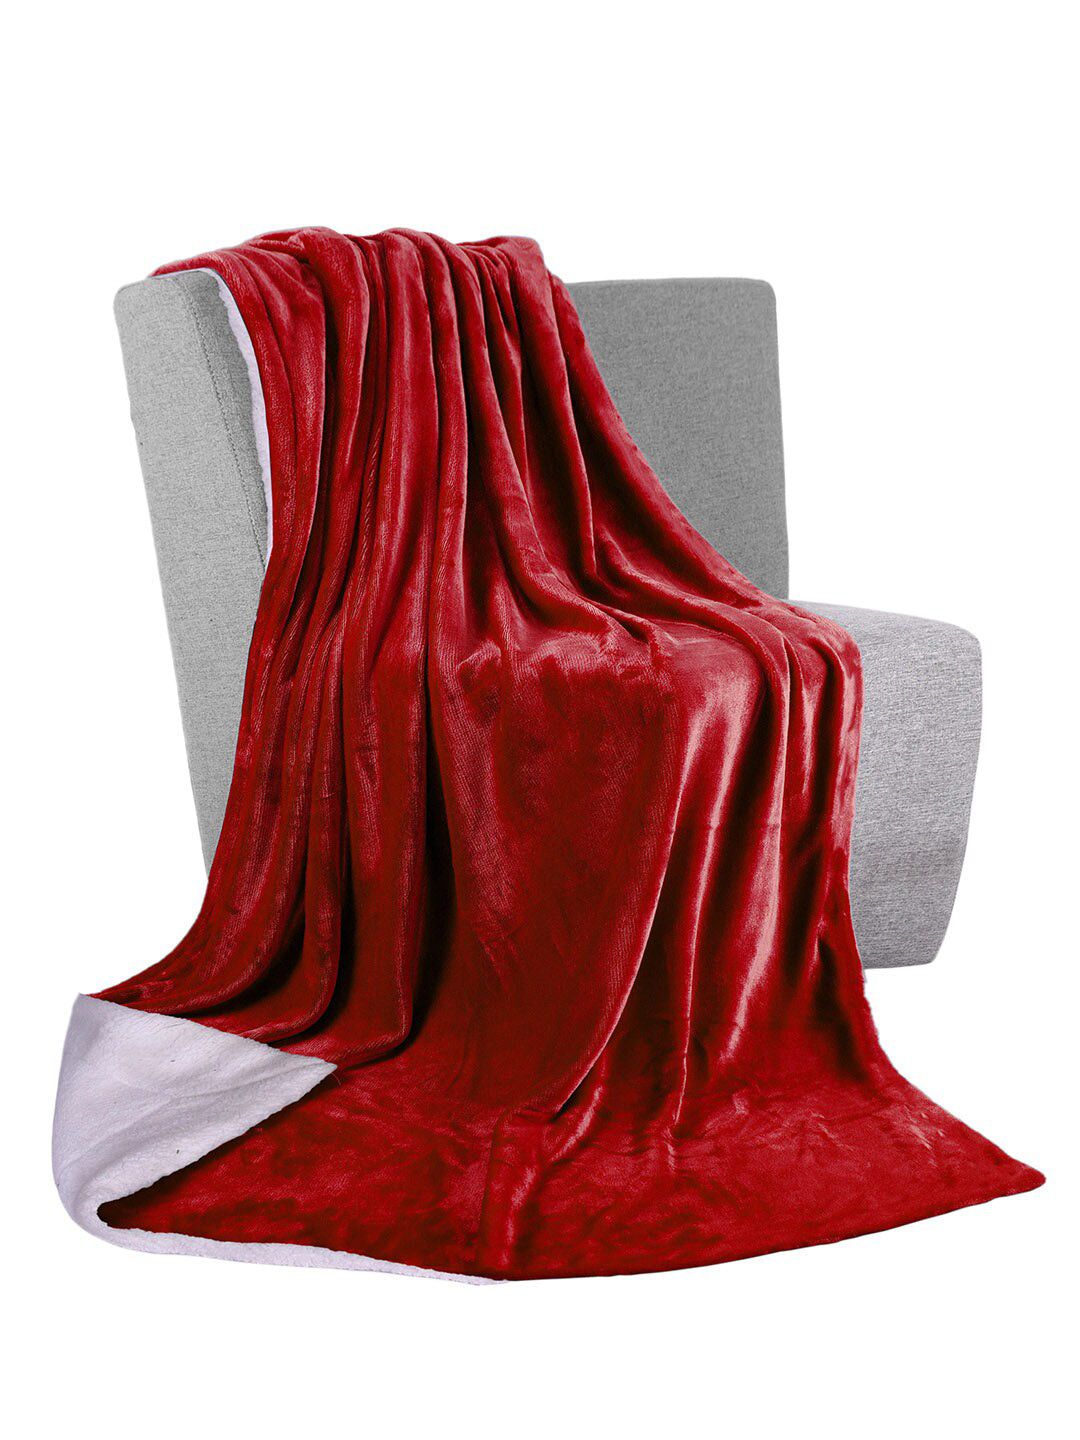 Athome by Nilkamal Red AC Room 300 GSM Single Bed Blanket Price in India